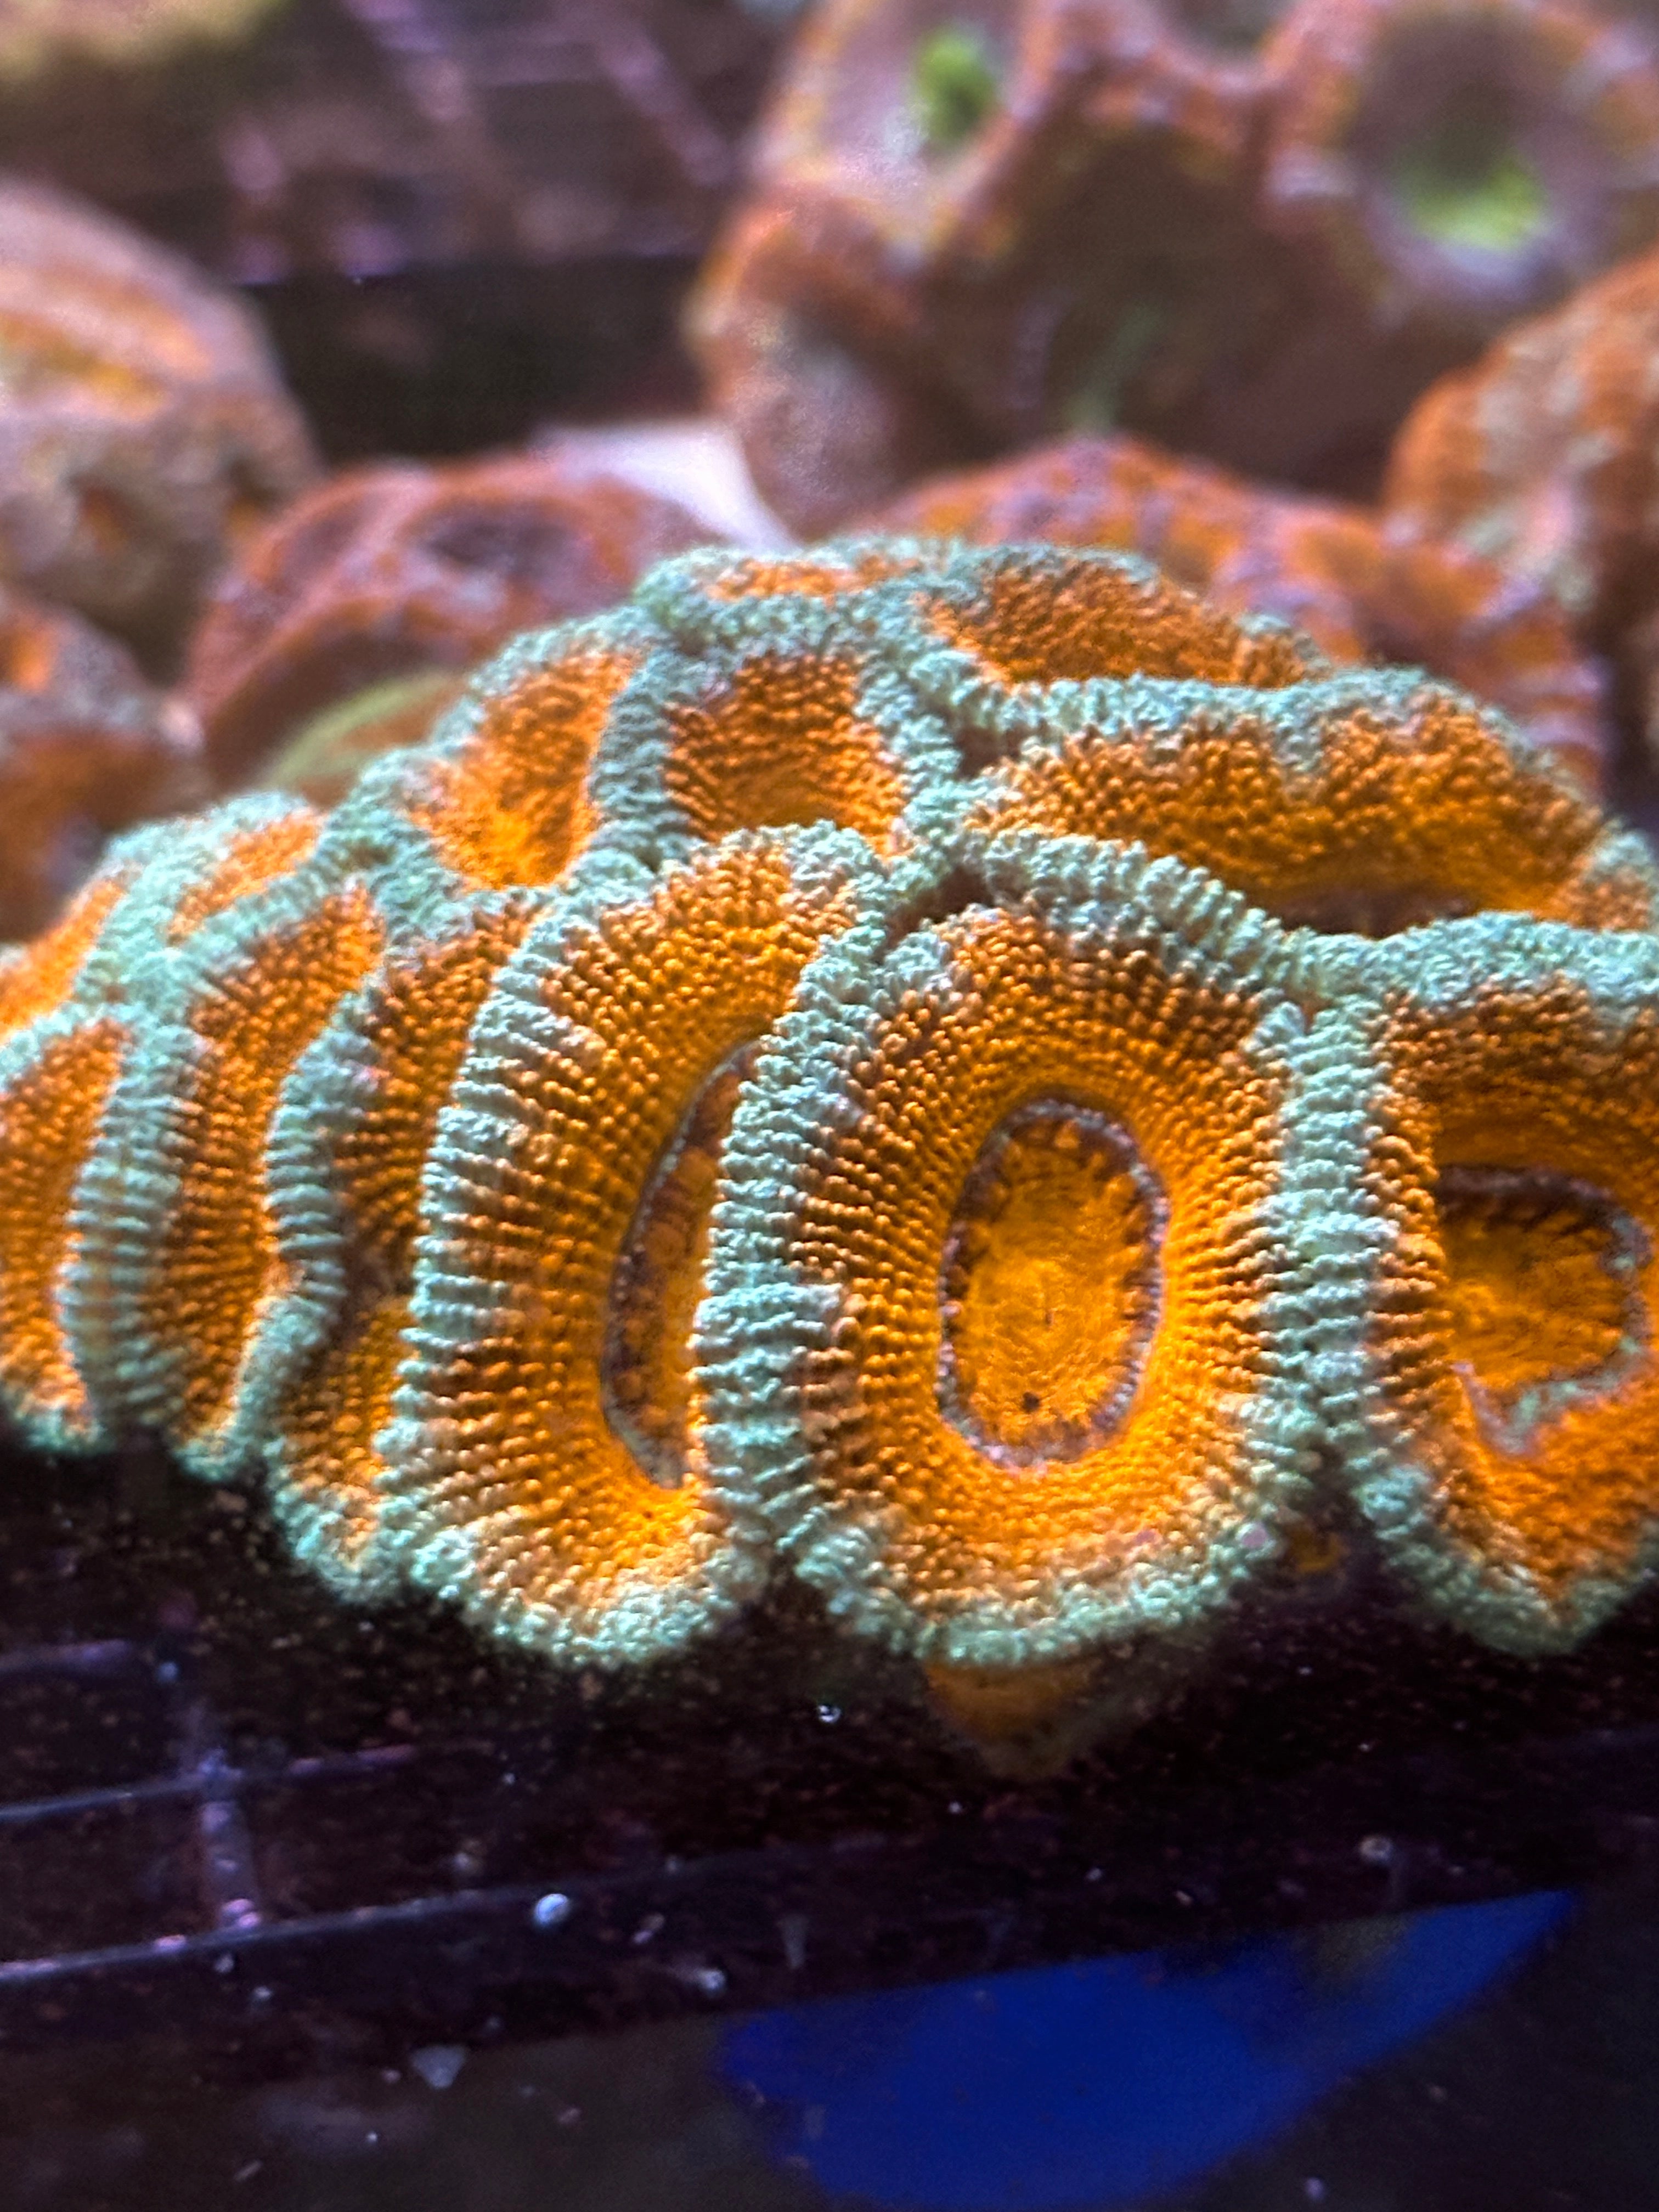 Orange and Green Acan Lord Colony